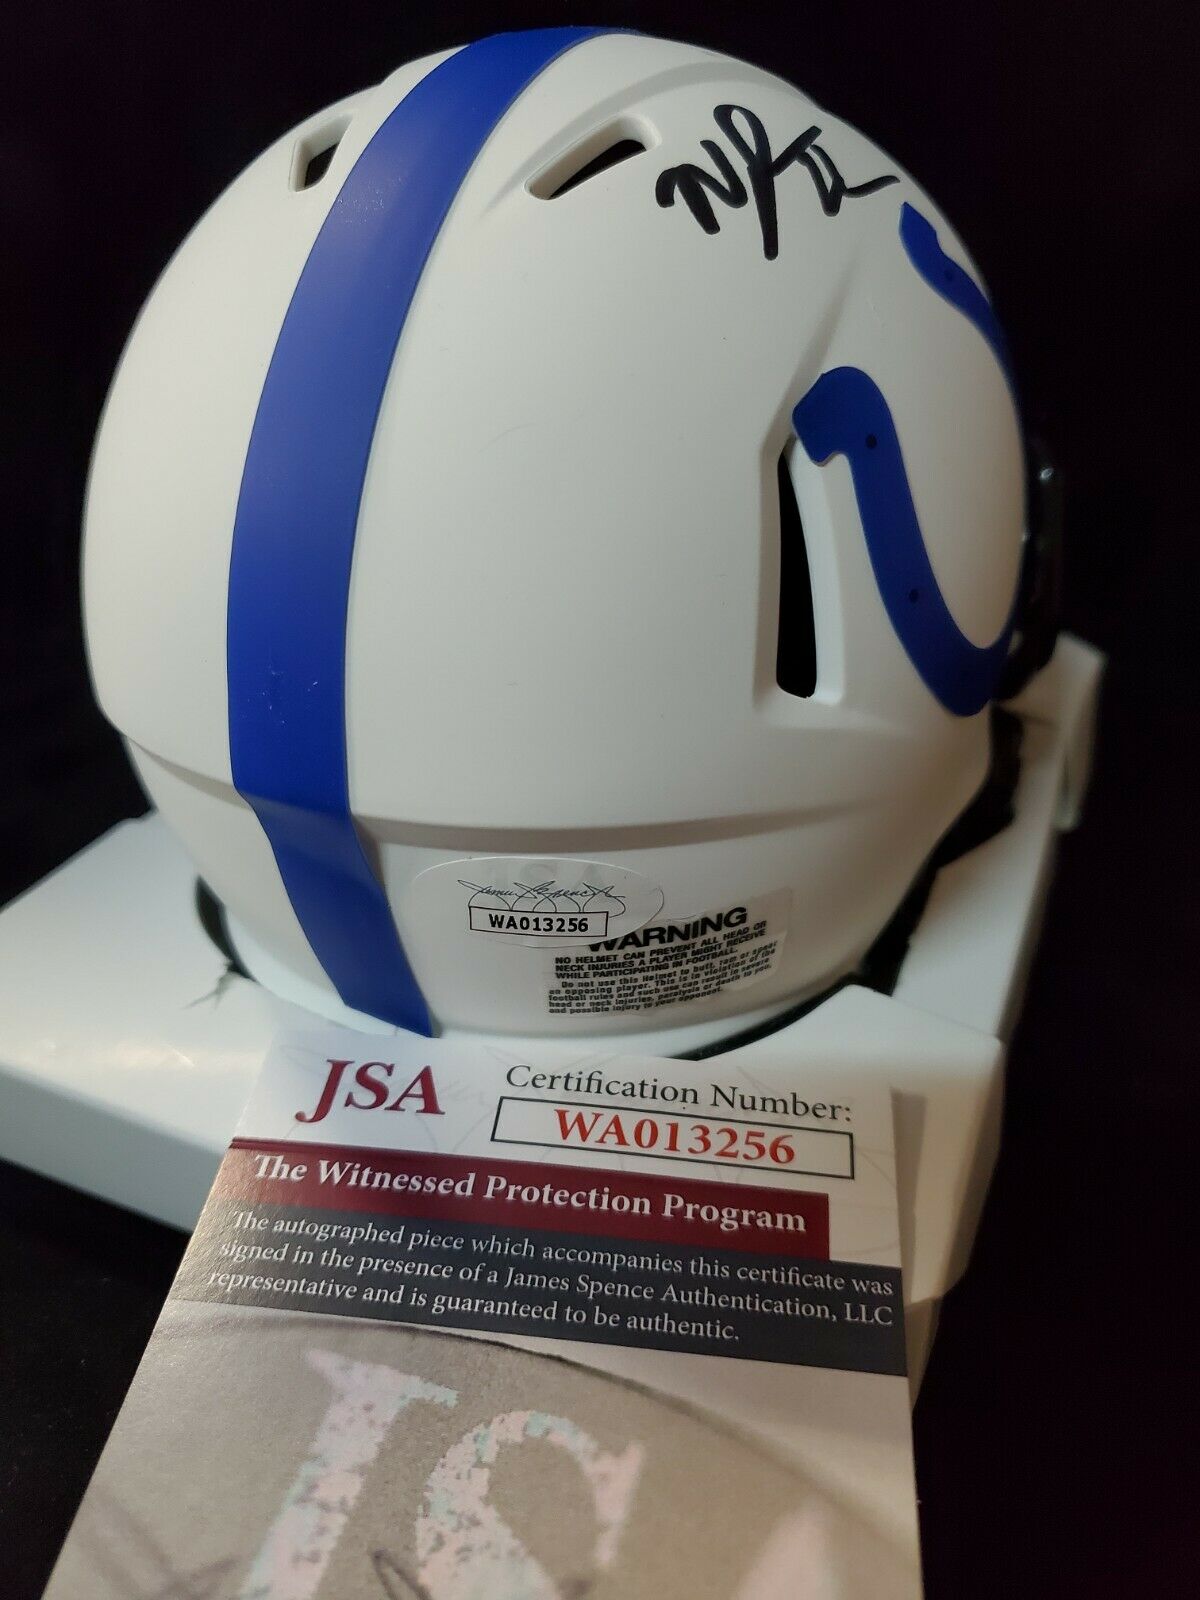 MVP Authentics Nyheim Hines Autographed Signed Indianapolis Colts Lunar Mini Helmet Jsa Coa 116.10 sports jersey framing , jersey framing